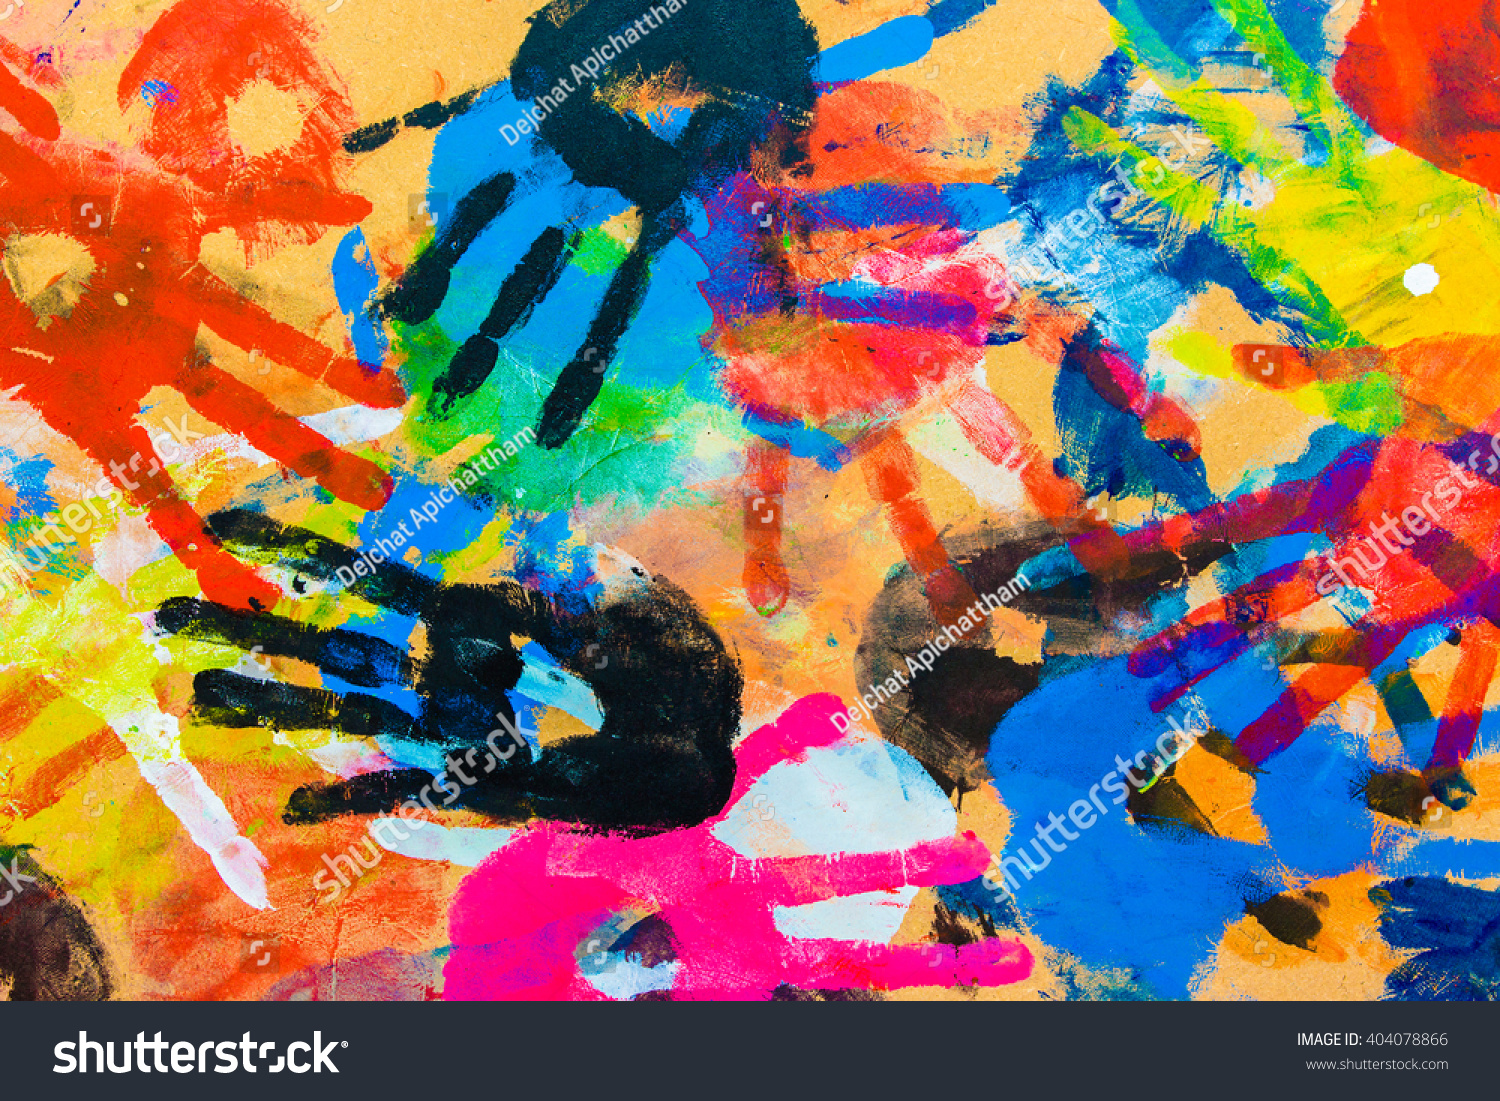 Colorful Hands Handprint Abstract Background Texture Stock Photo ...